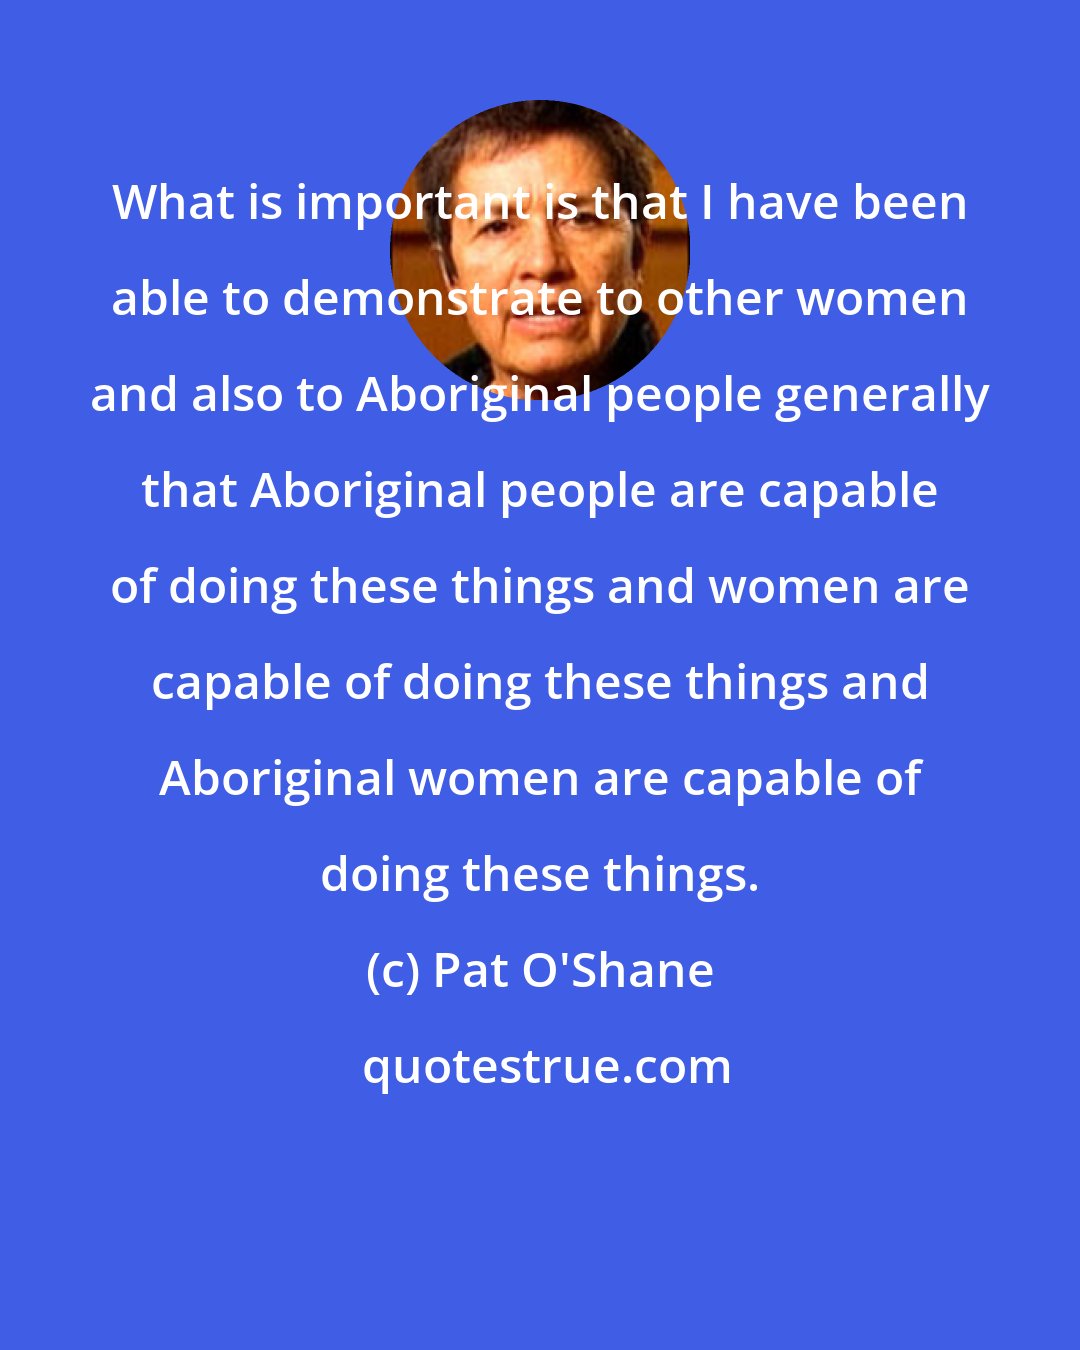 Pat O'Shane: What is important is that I have been able to demonstrate to other women and also to Aboriginal people generally that Aboriginal people are capable of doing these things and women are capable of doing these things and Aboriginal women are capable of doing these things.